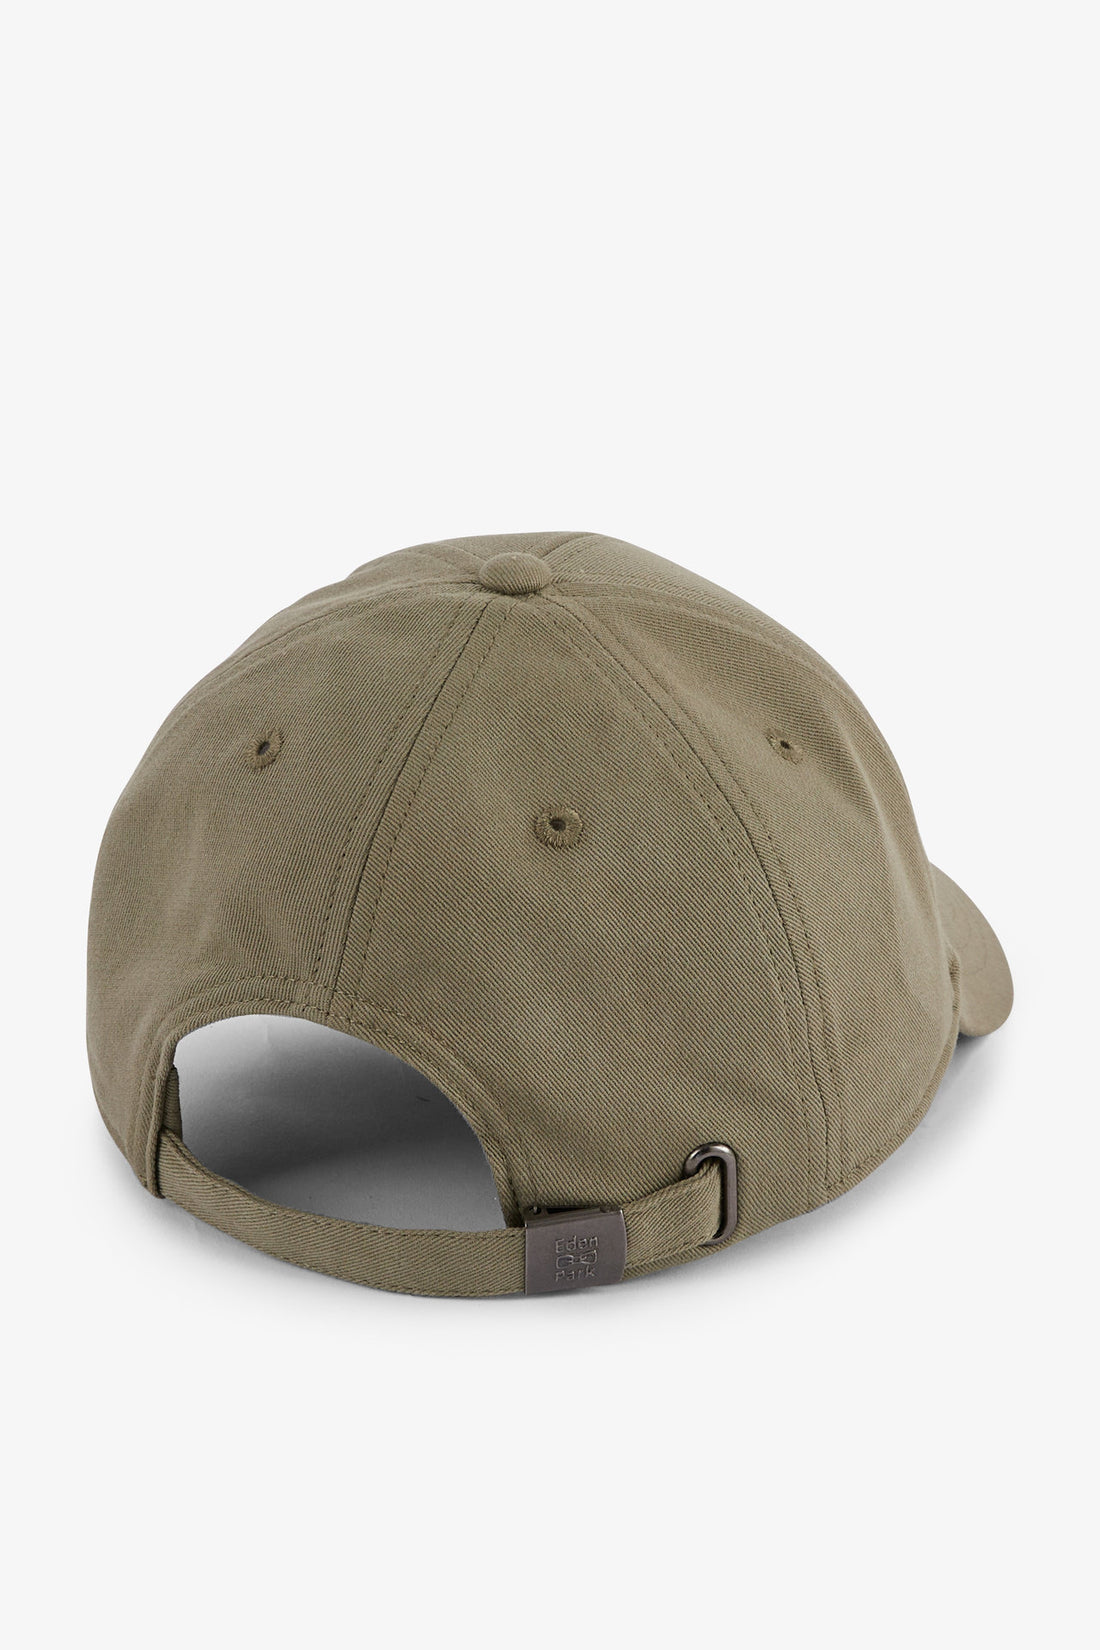 Beige Cotton Canvas Cap With Bow Tie Embroidery_E24CHACA0001_BEF3_02